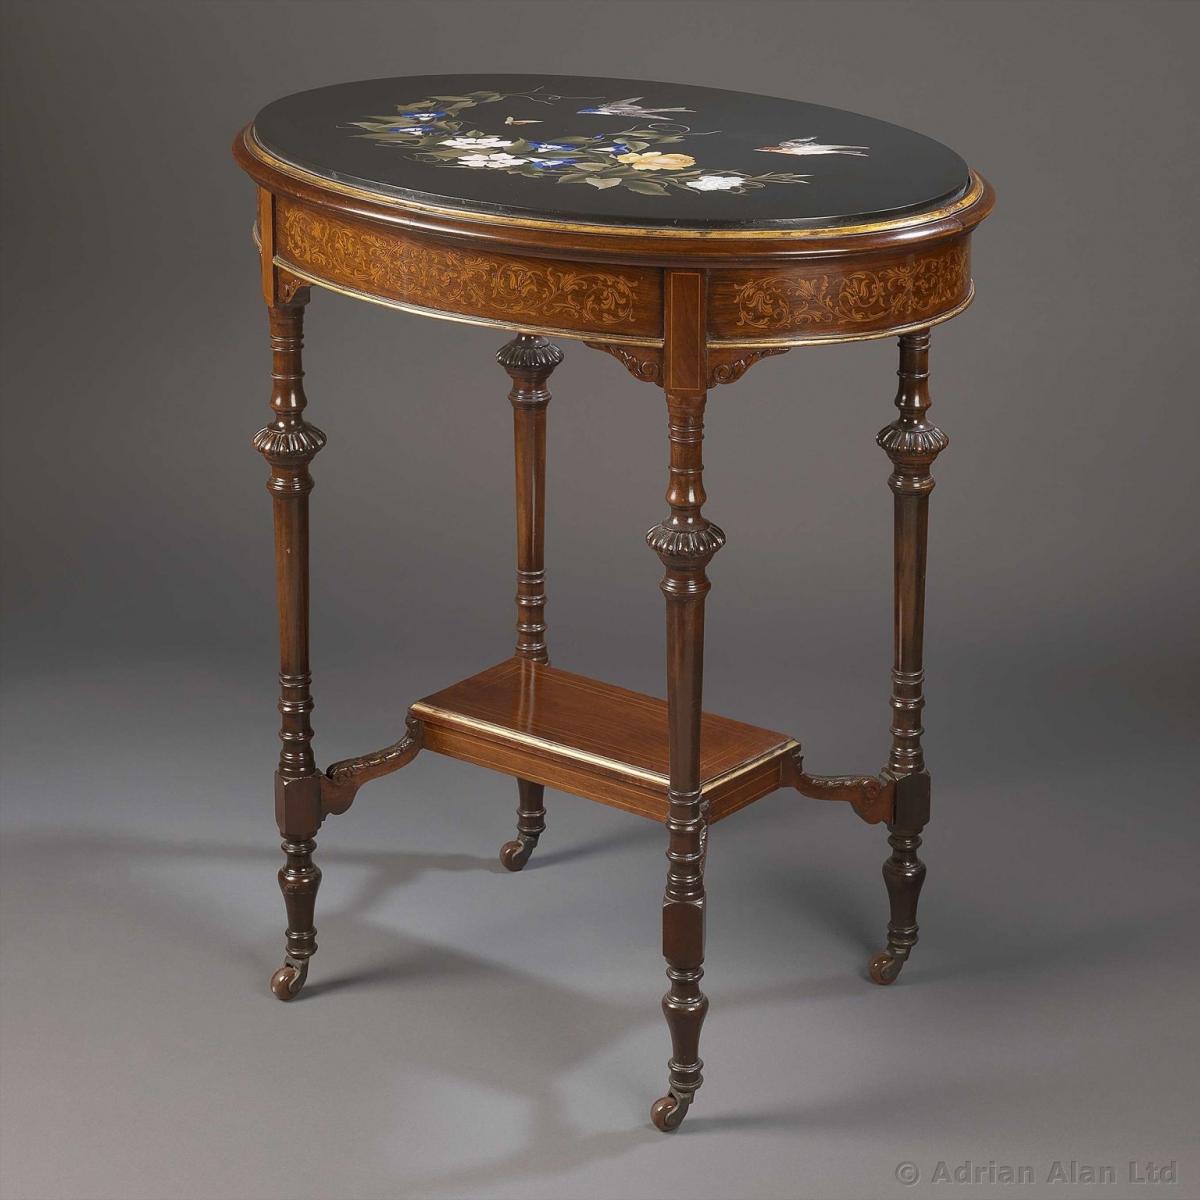 A Table With Marble Top - © Adrian Alan Ltd, Fine Arts and Antiques